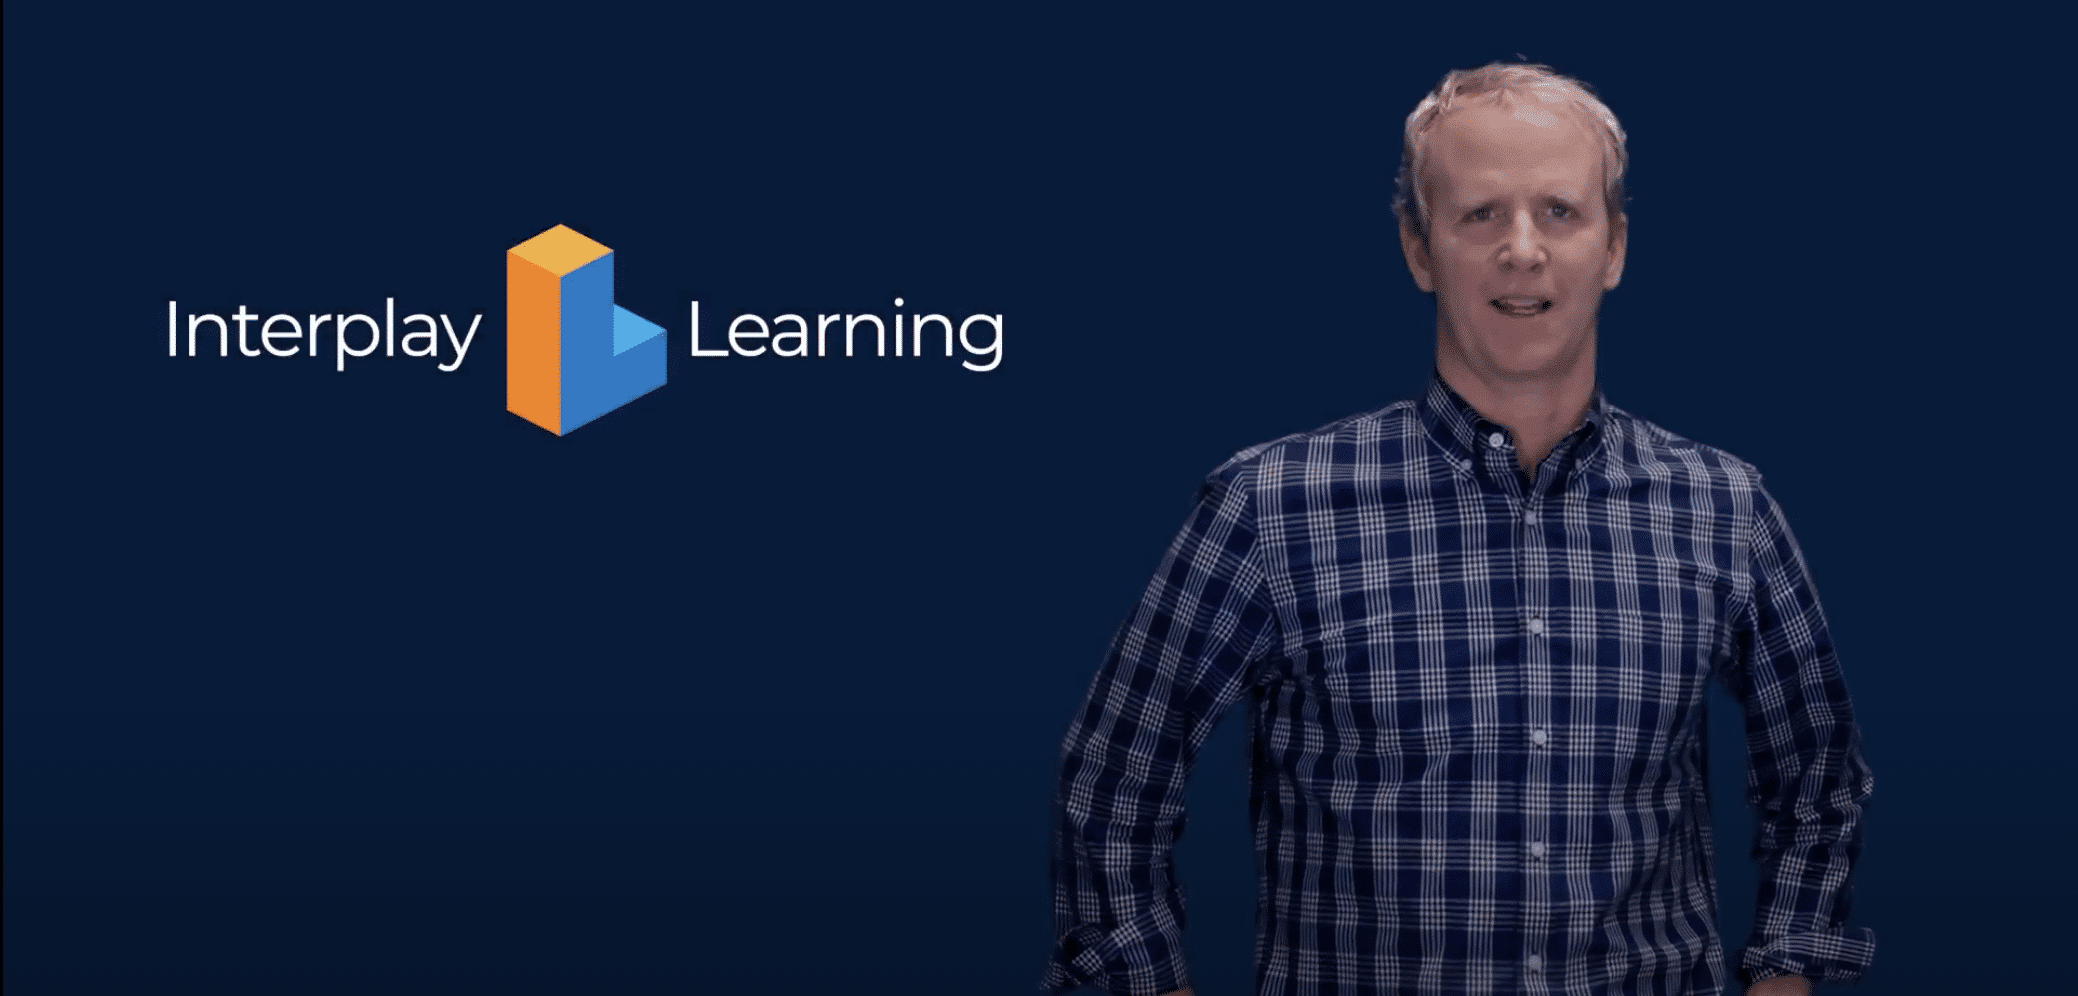 A man standing in front of an Interplay Learning logo